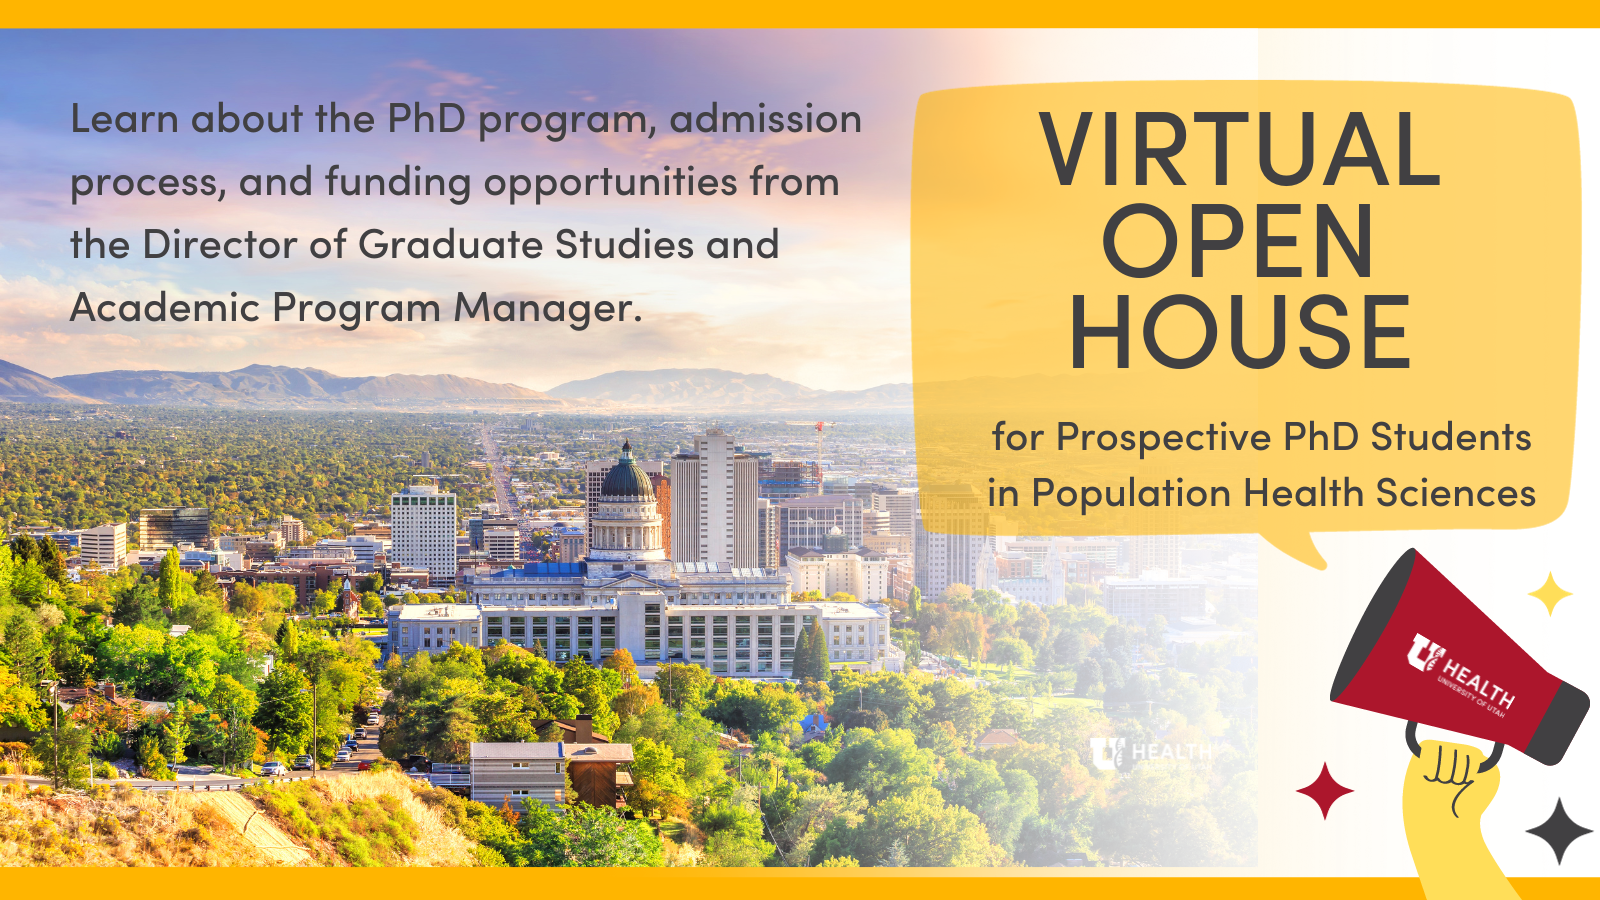 Virtual Open House for Prospective PhD Students in Population Health Sciences